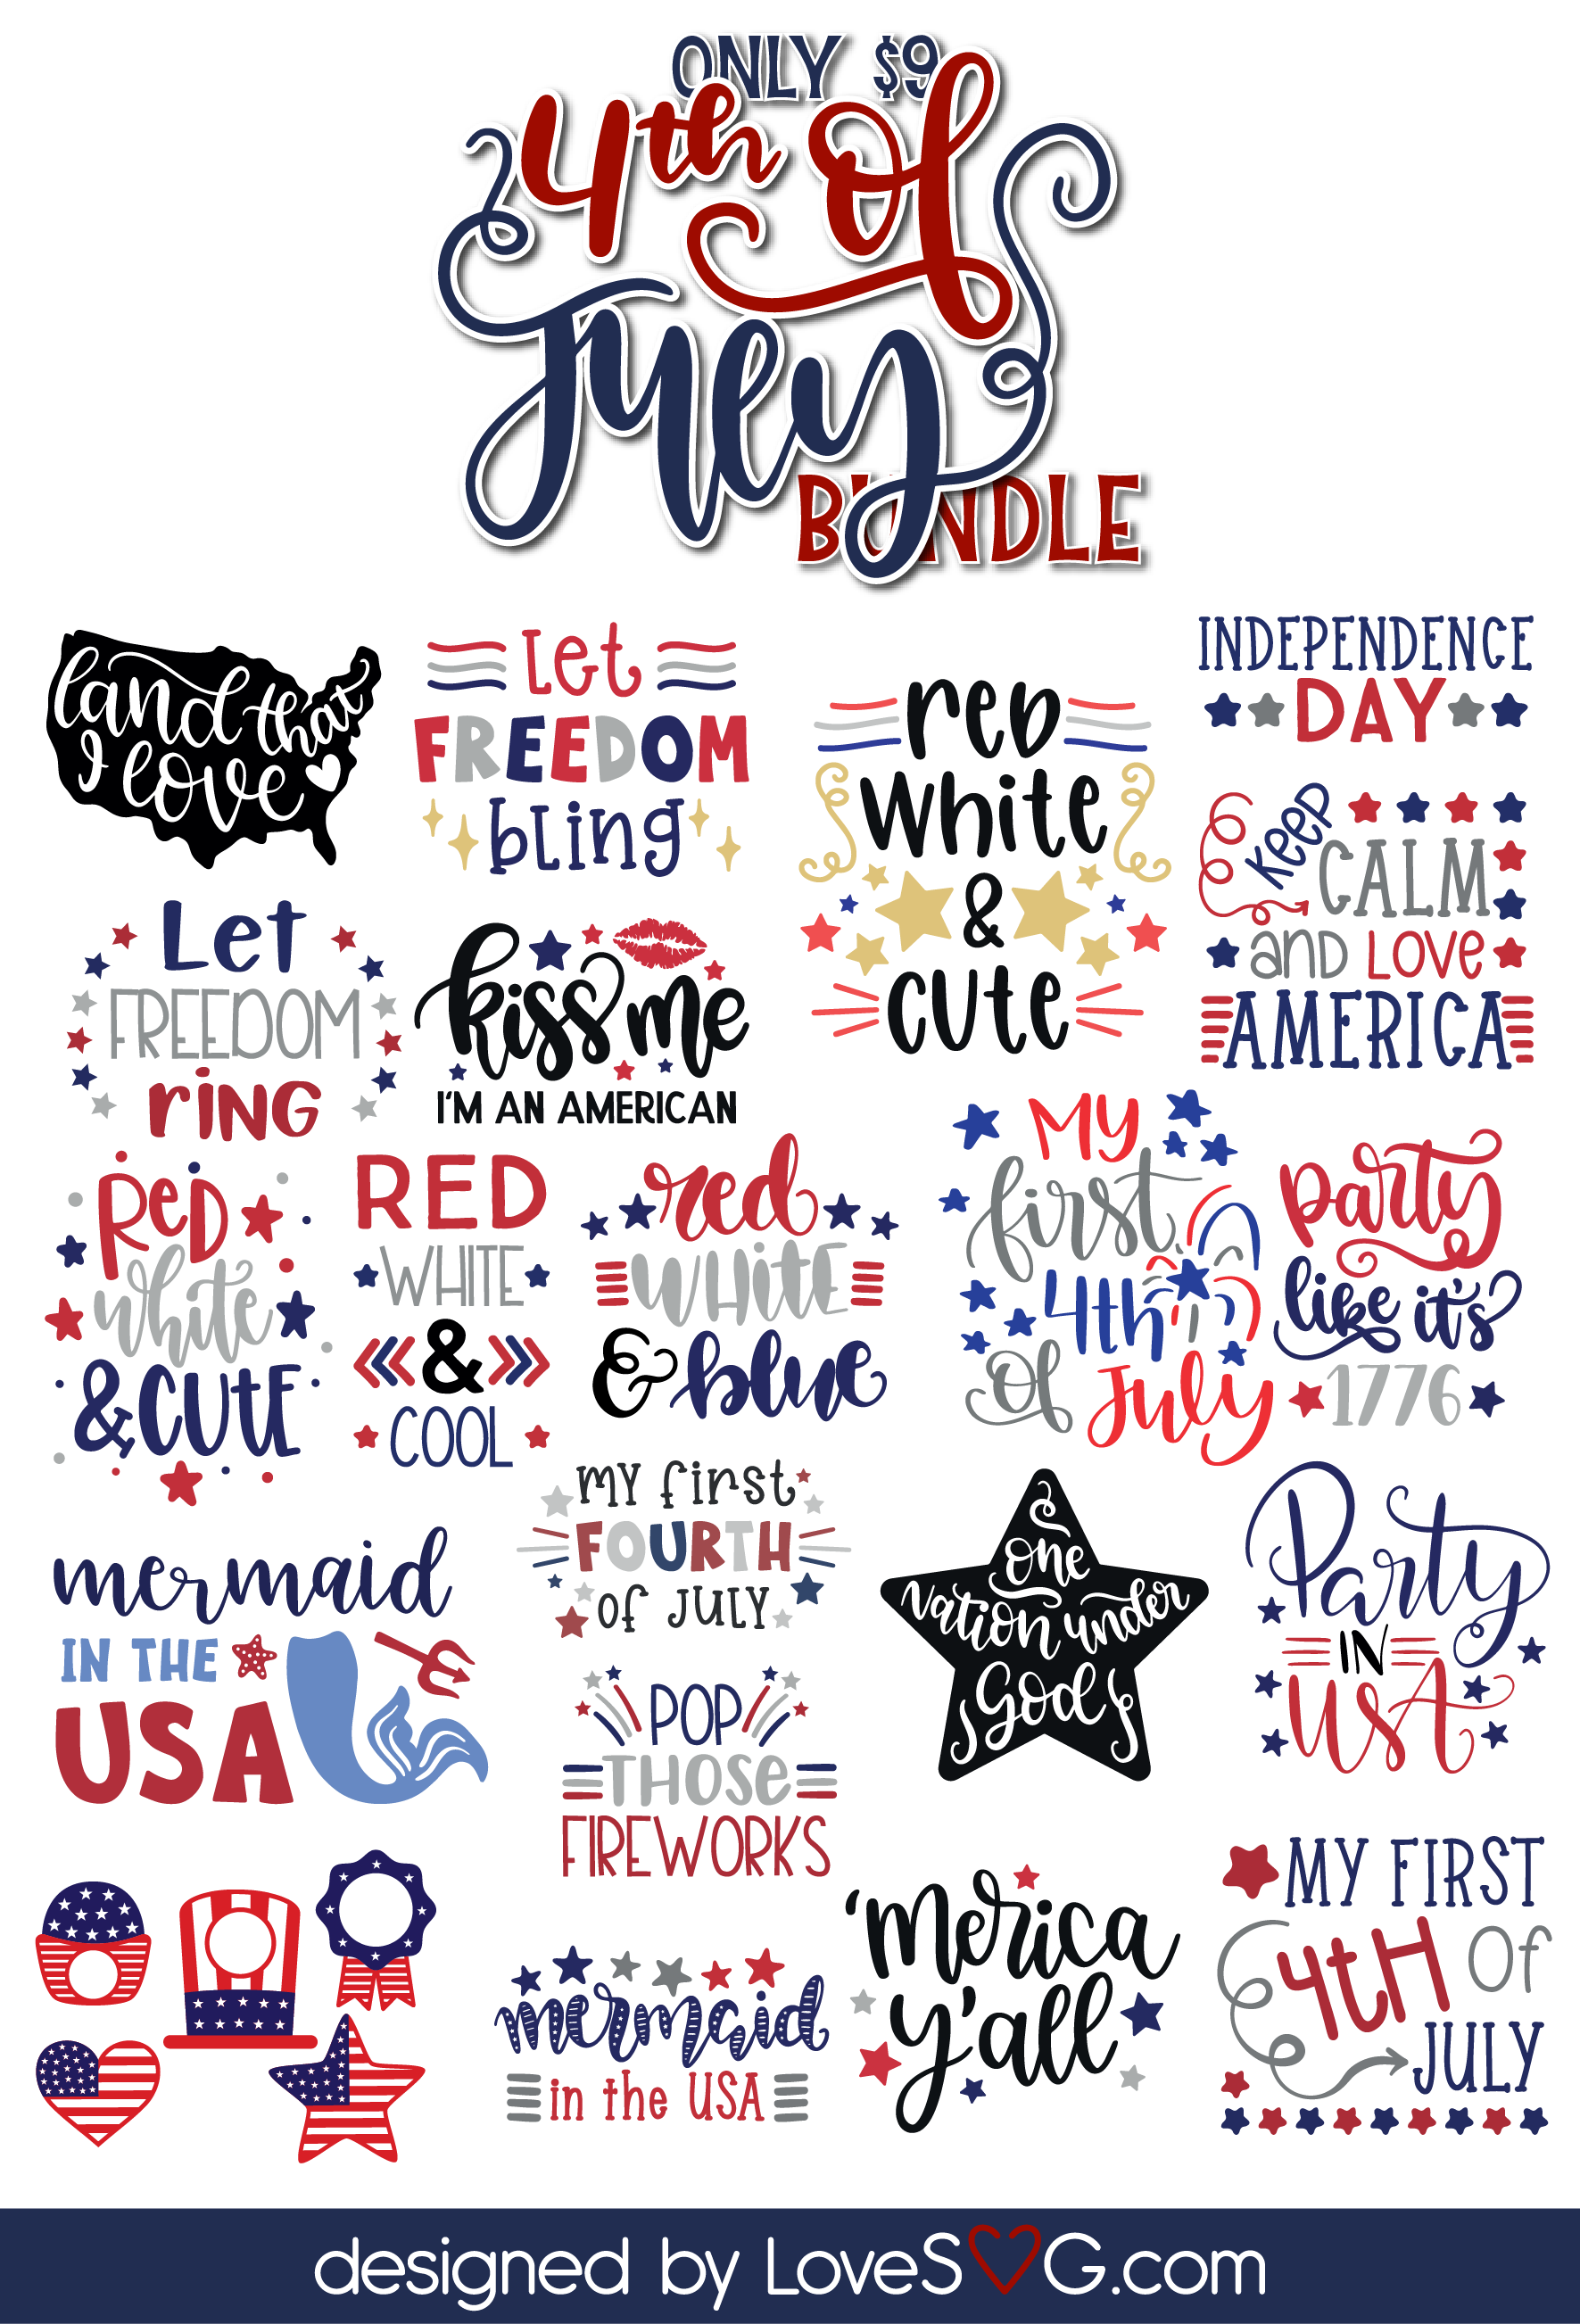 Celebrate 4th of July with These SVG Files!